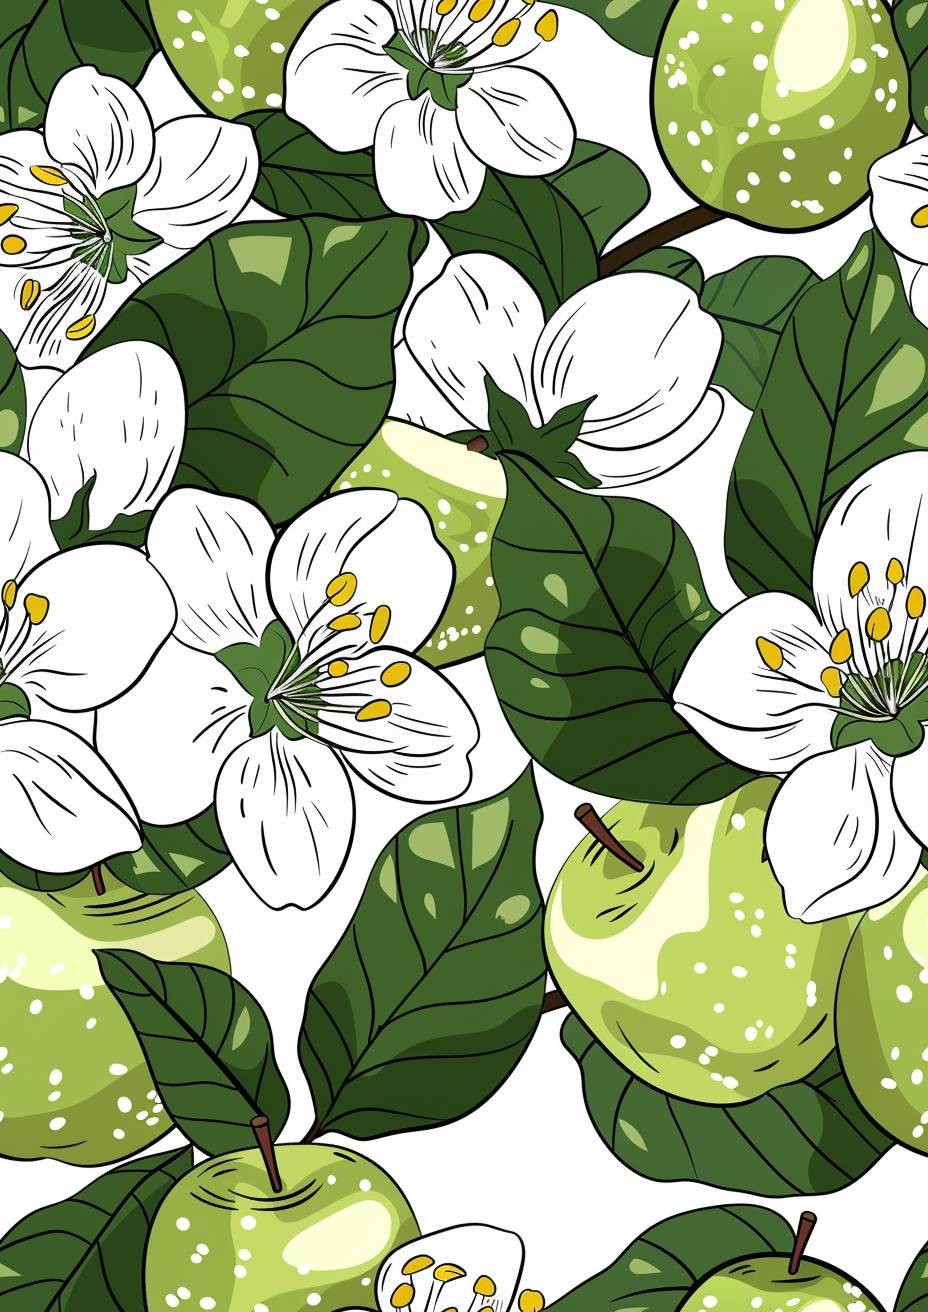 Coloring book page, white apple flowers and beautiful green apples